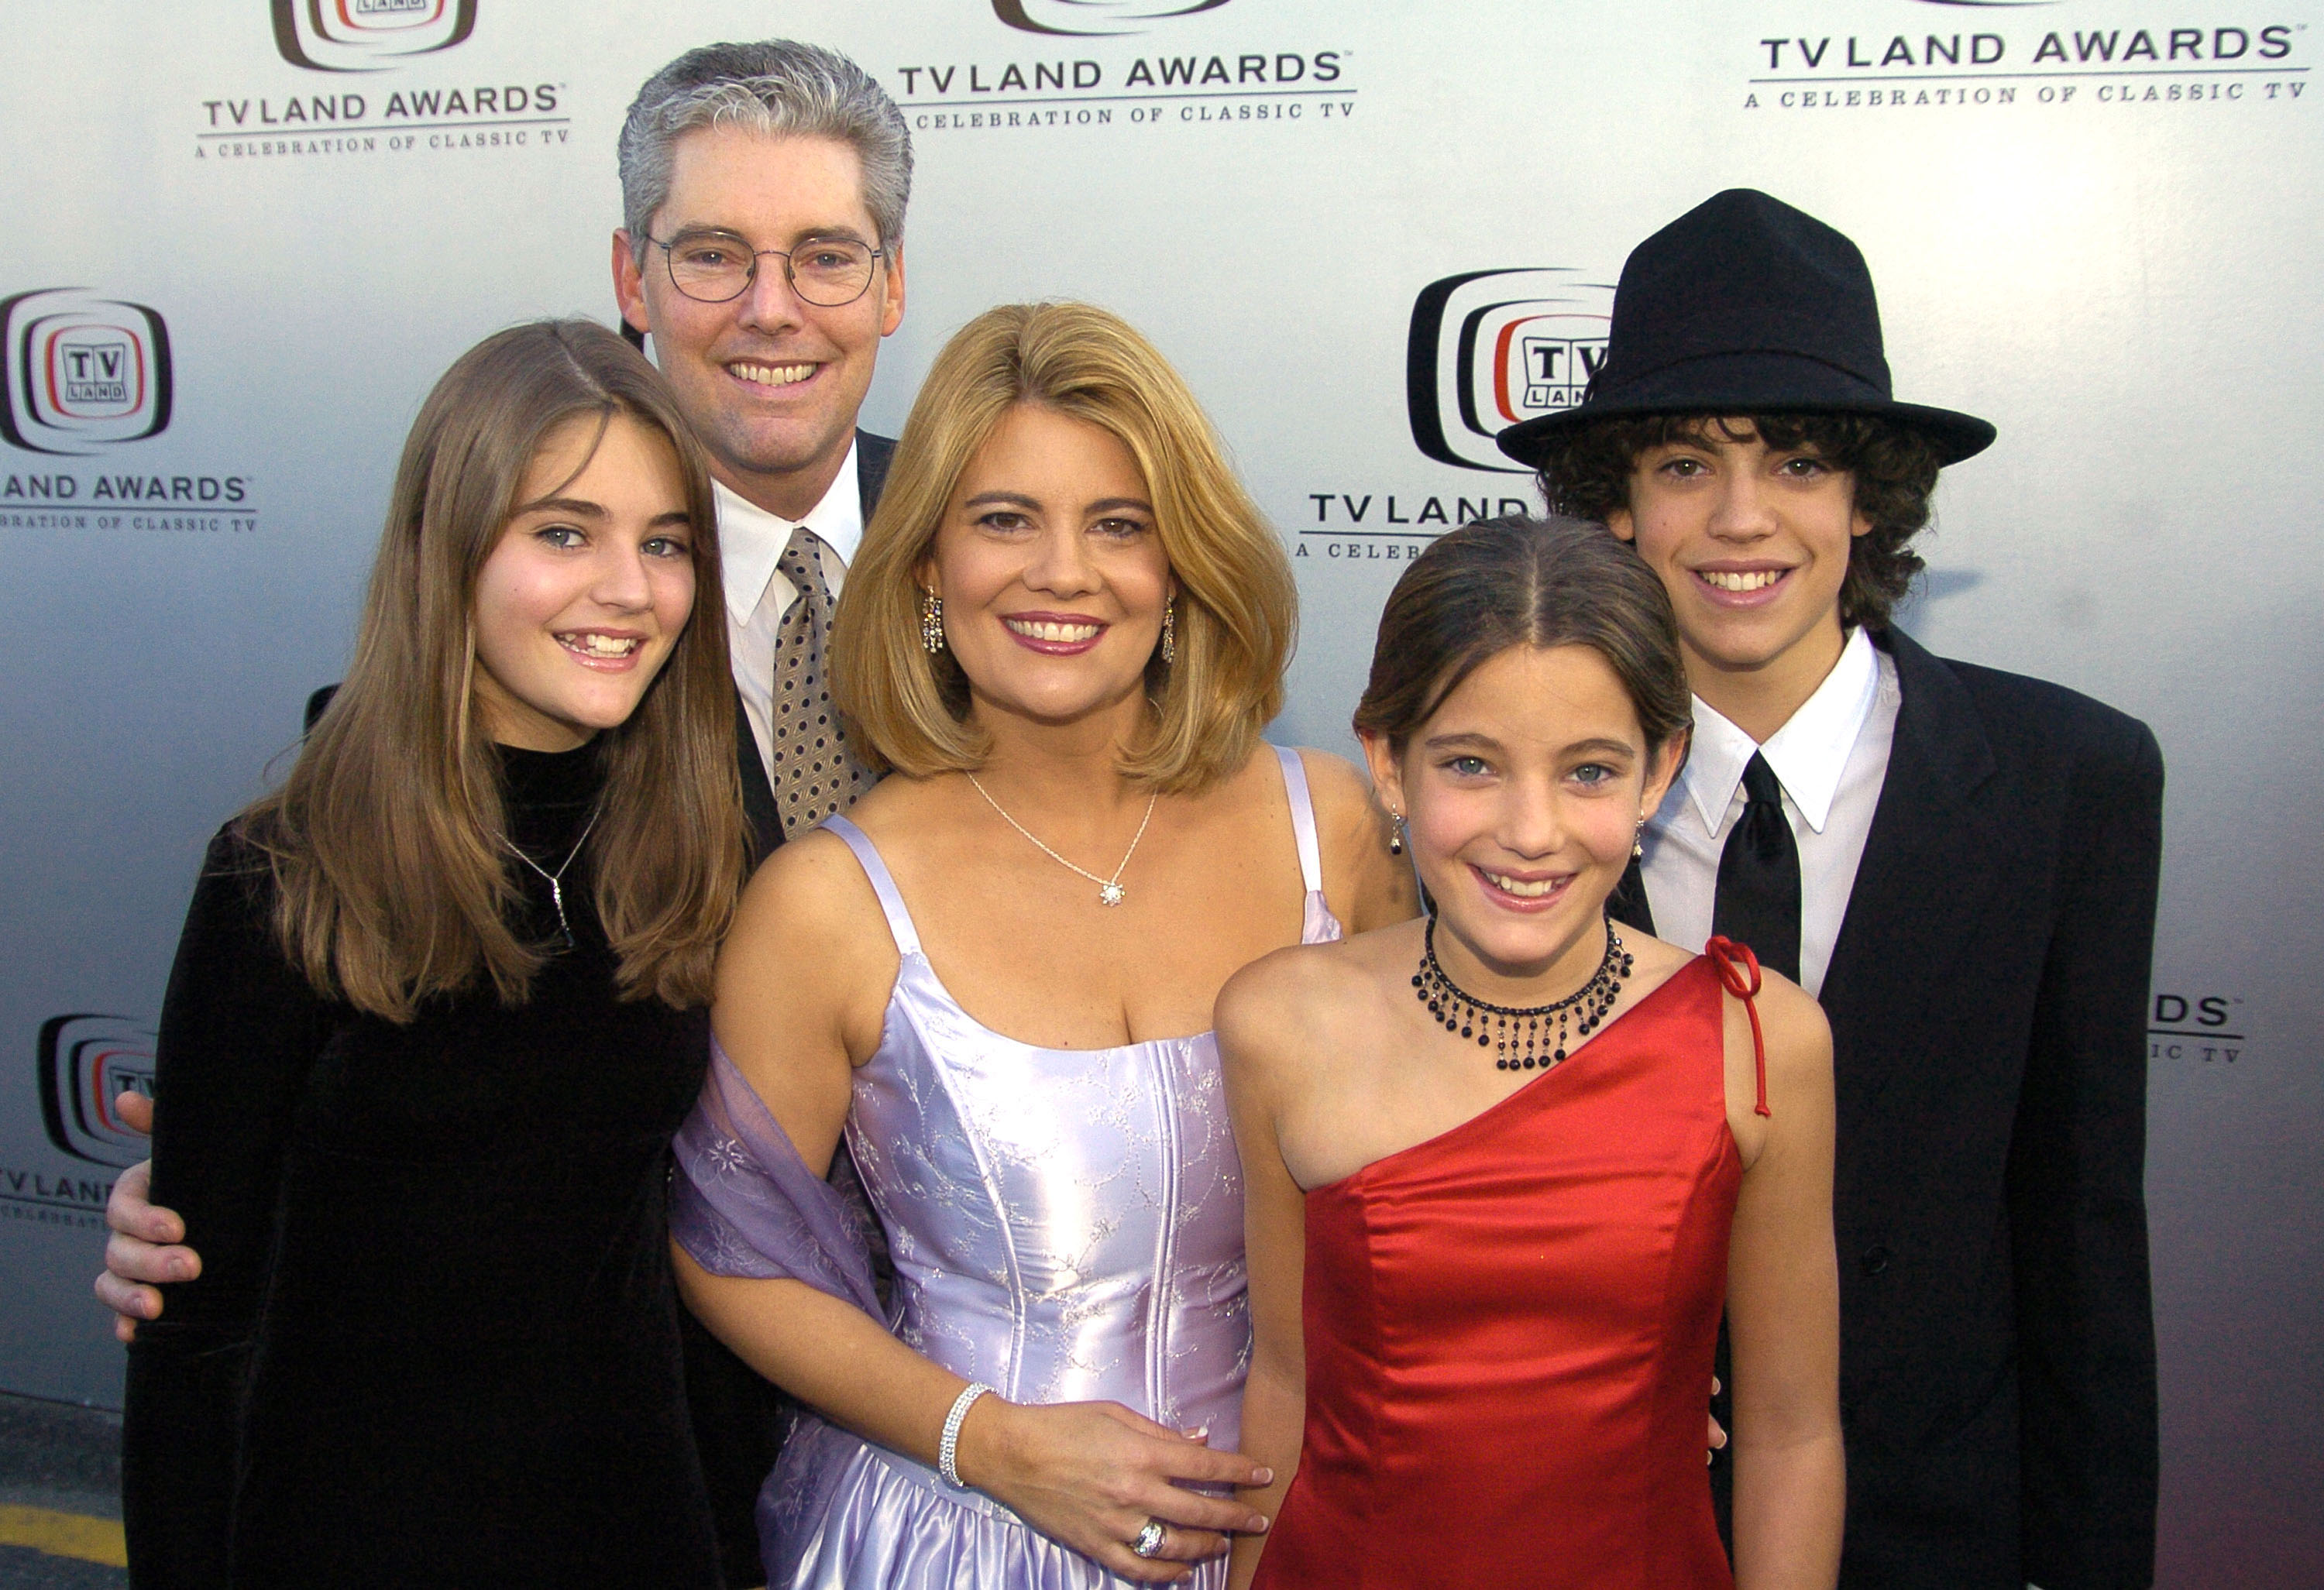 Lisa Whelchel and family during the 2004 TV Land Awards at The Palladium in Hollywood, California | Source: Getty Images